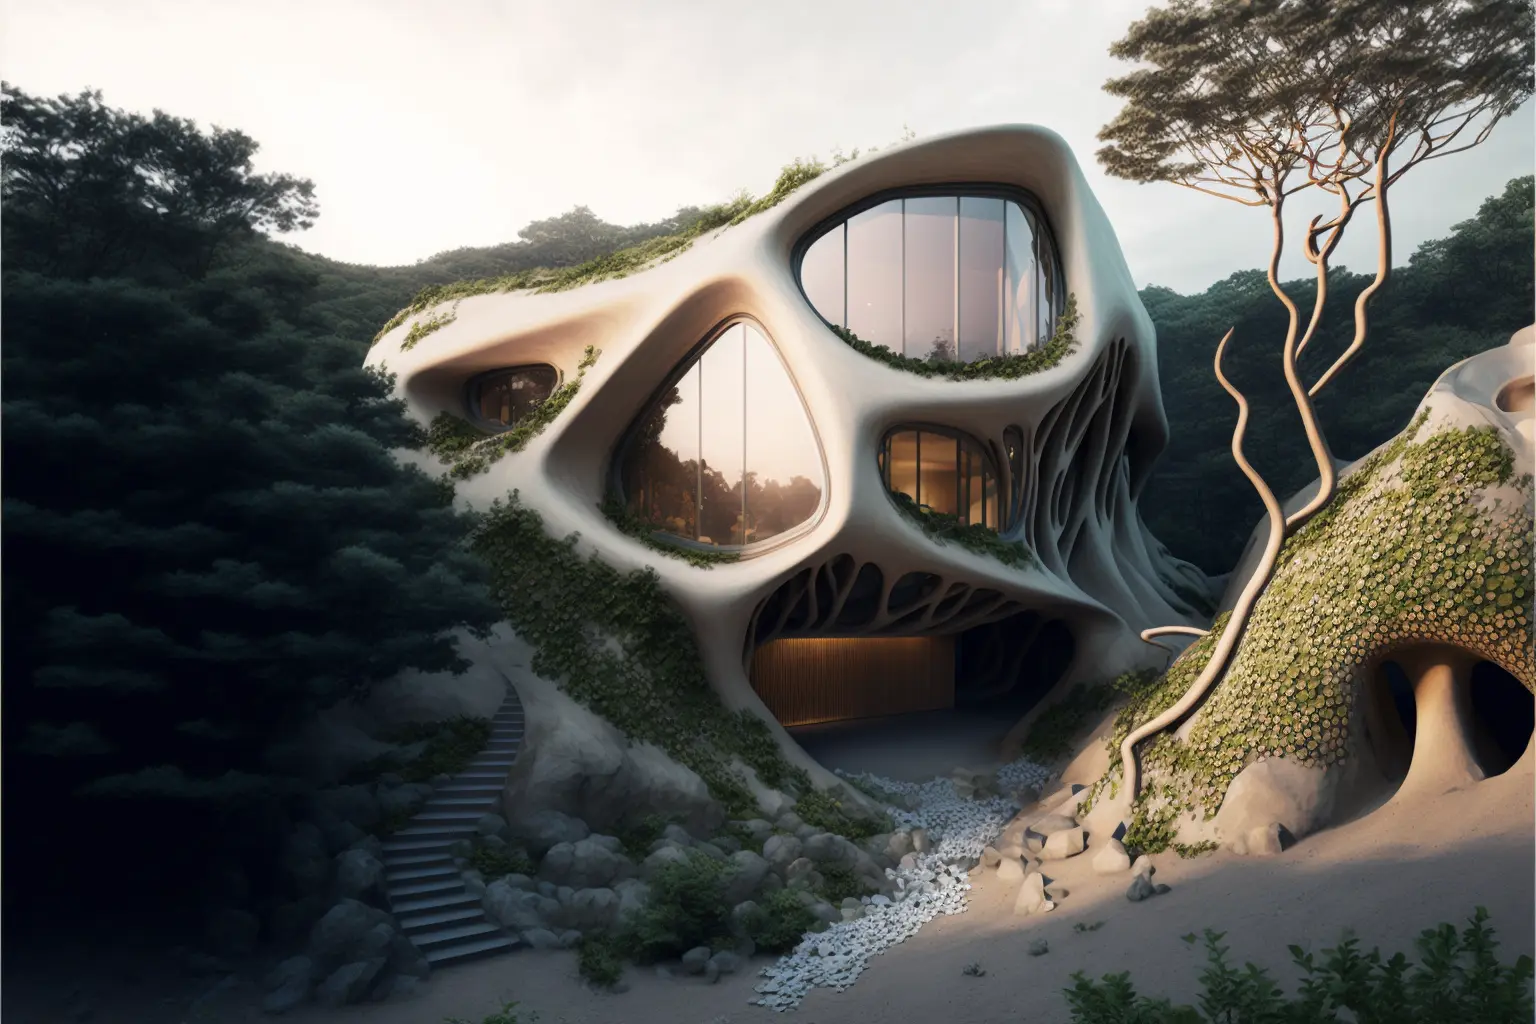 organic house embedded into the hilly terrain designed by Kengo Kuma, architectural photography, style of archillect, futurism, modernist architecture 